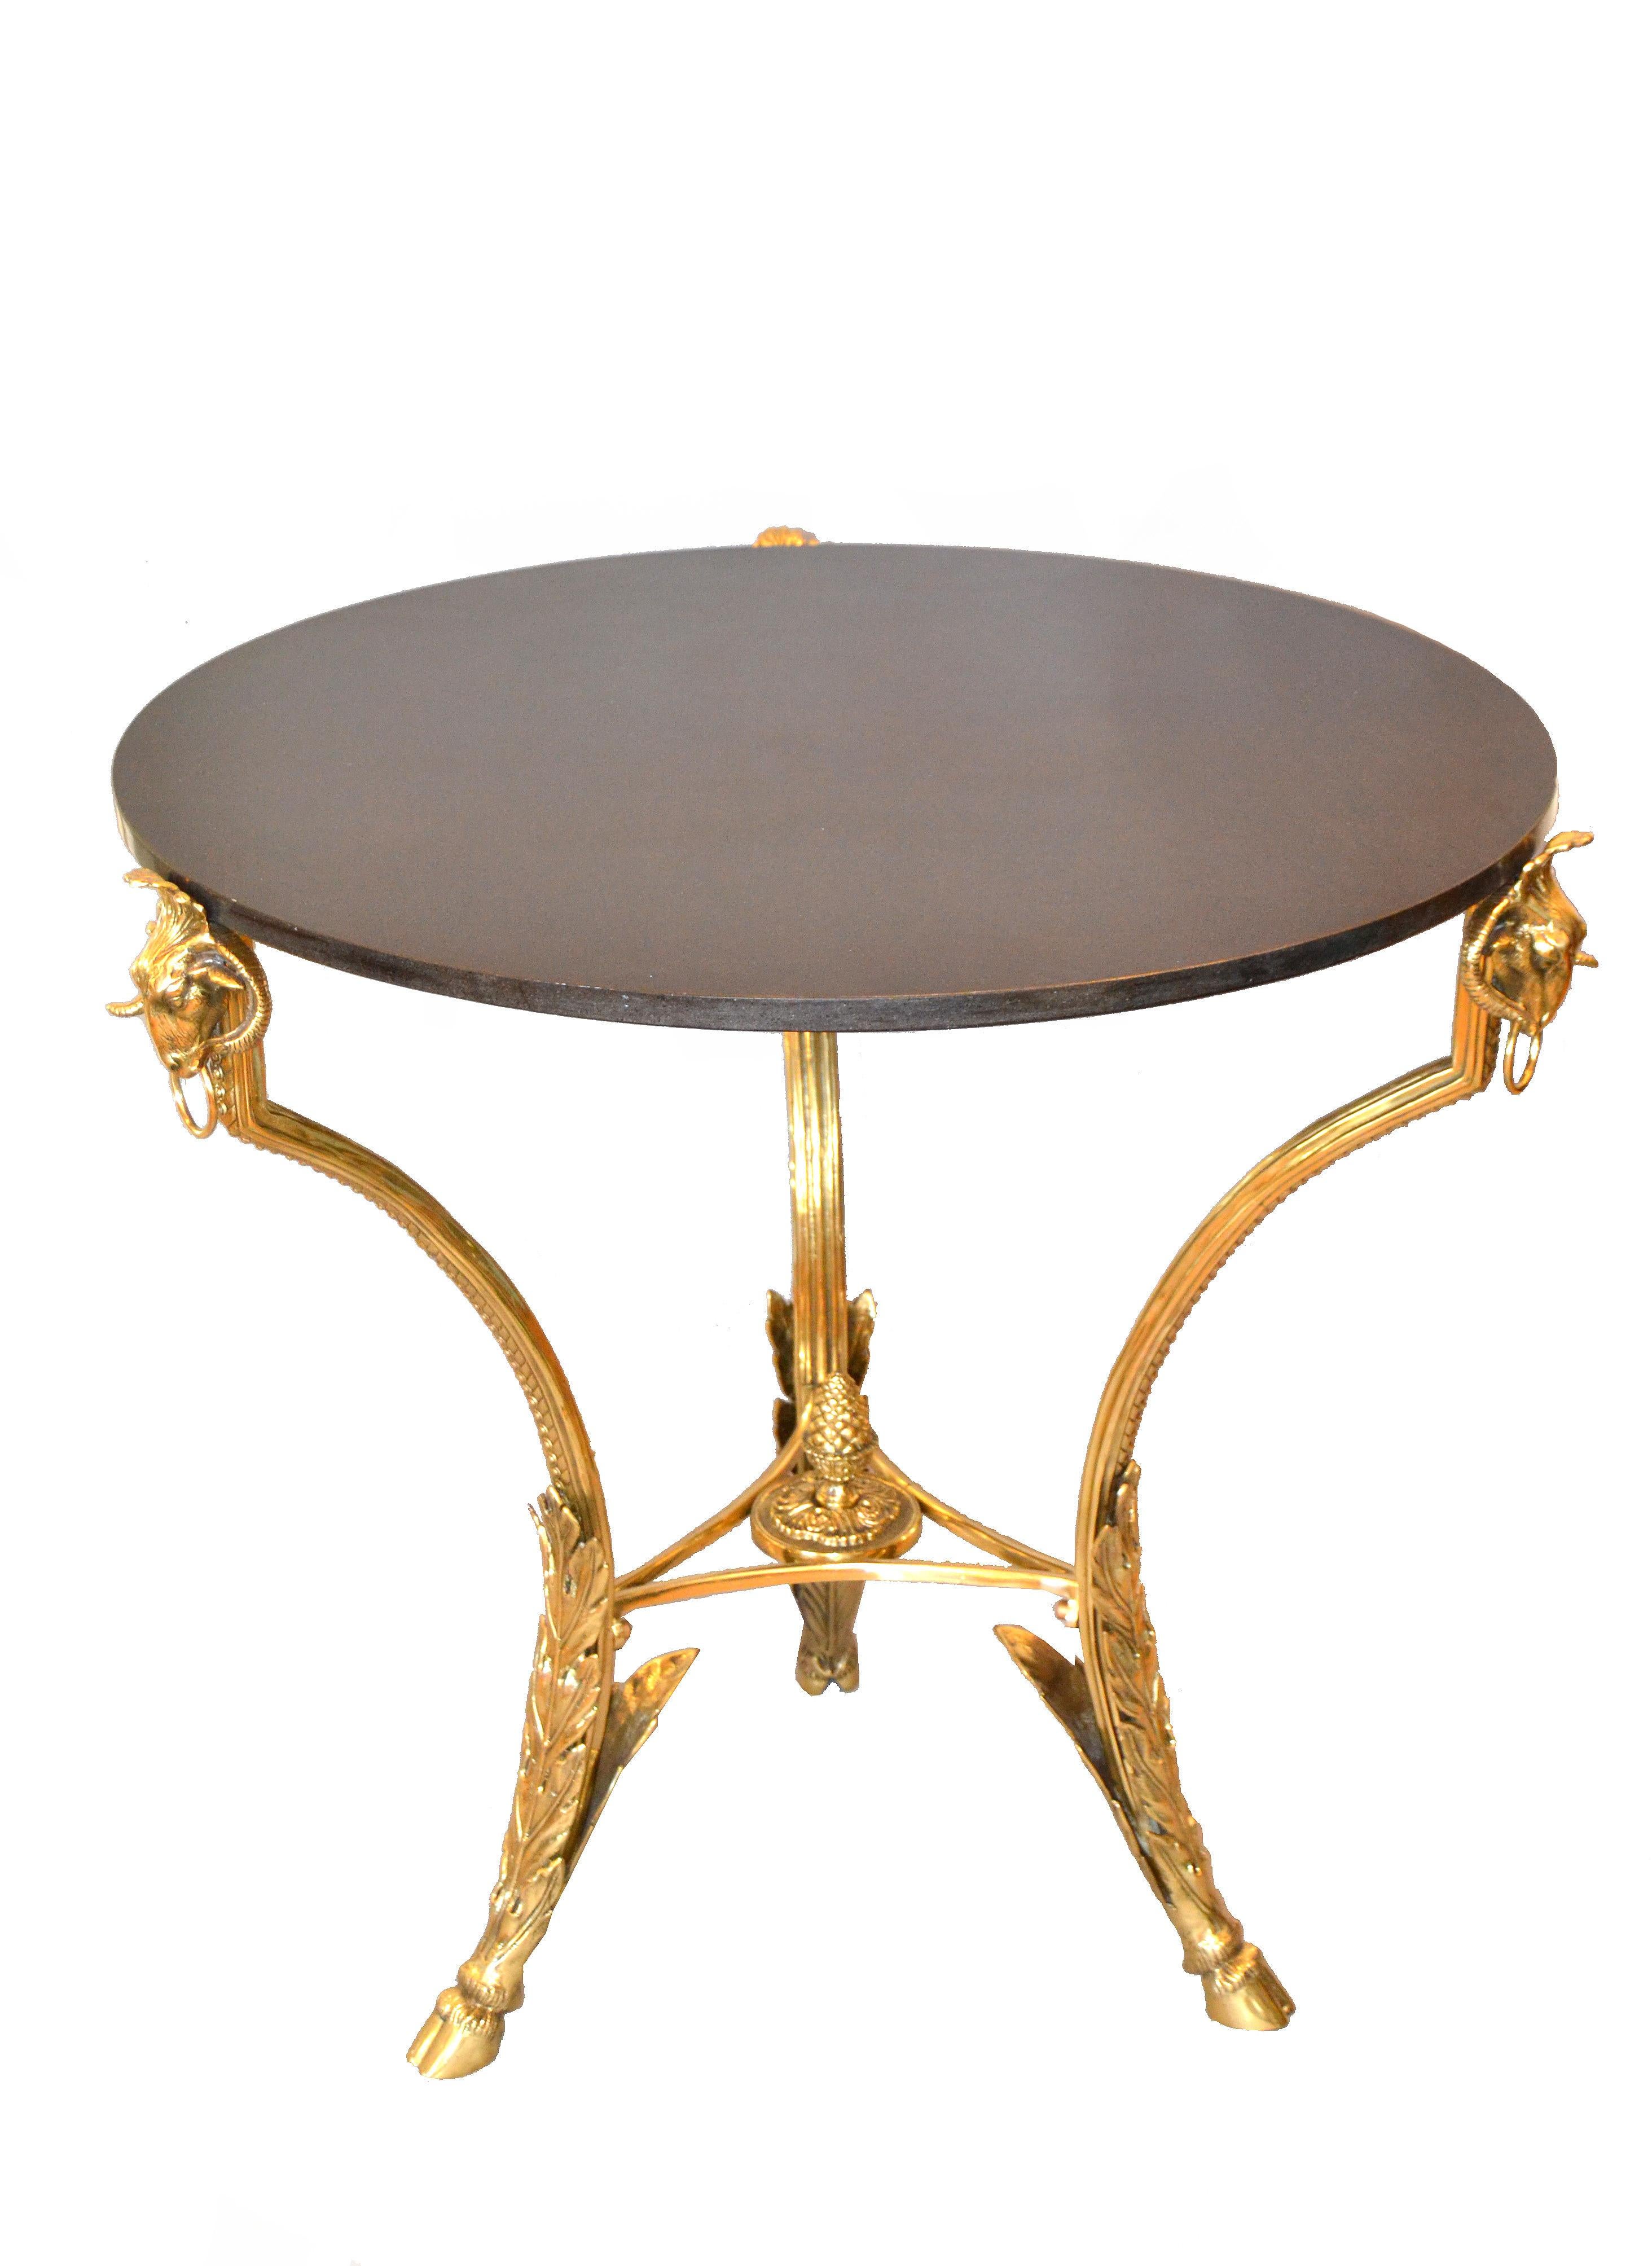 French Provincial French Round Bronze Gueridon Style Table Rams Heads and Feet with Granite Top For Sale